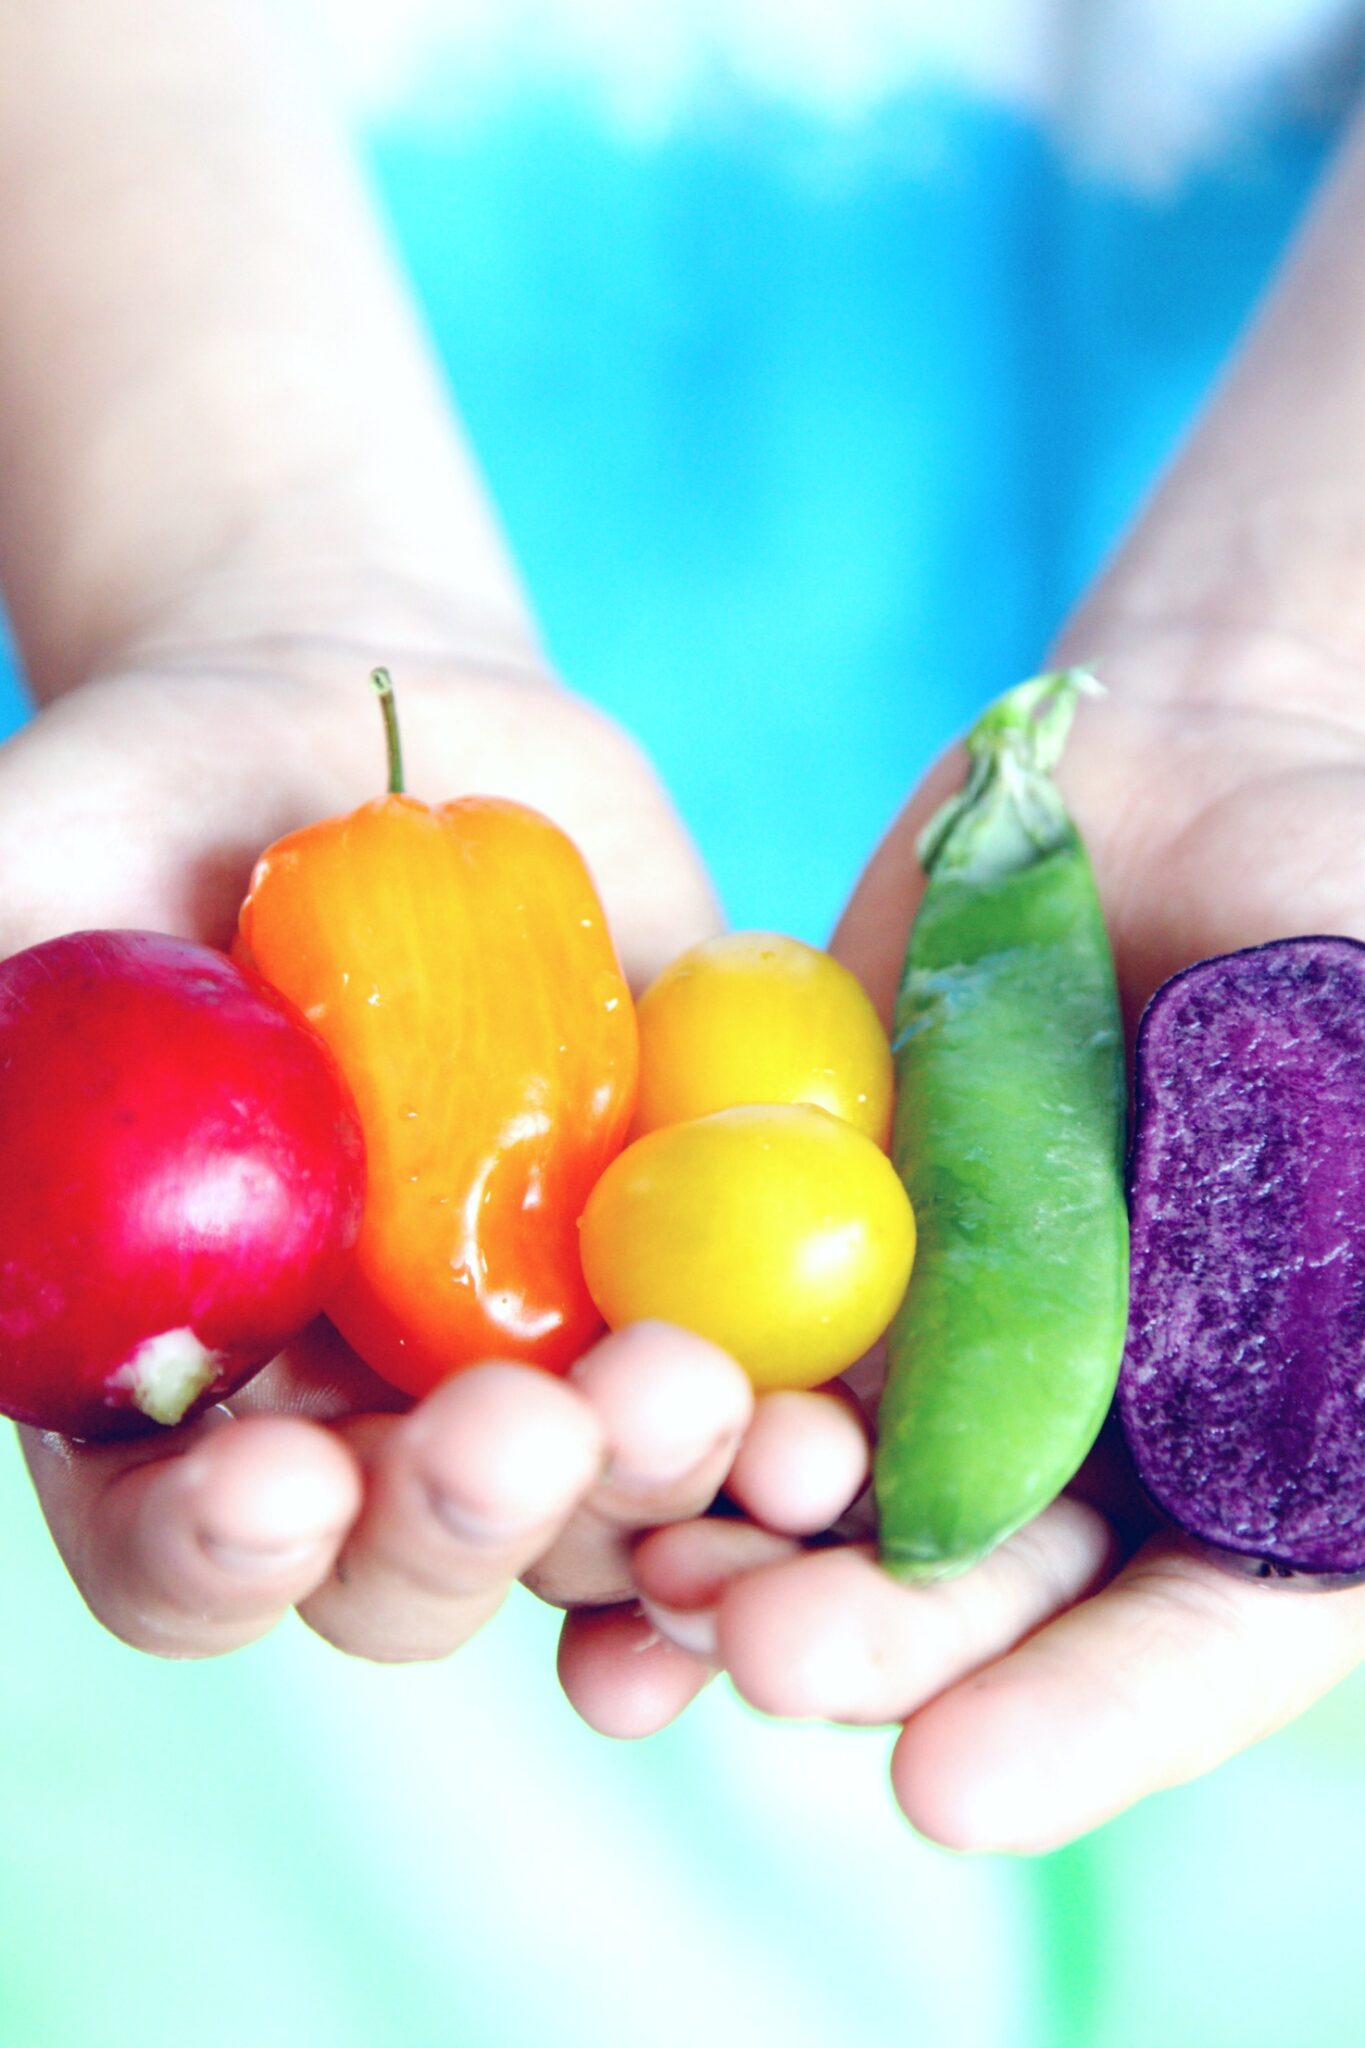 7 Proven Ways to Get Your Kids to Eat Vegetables